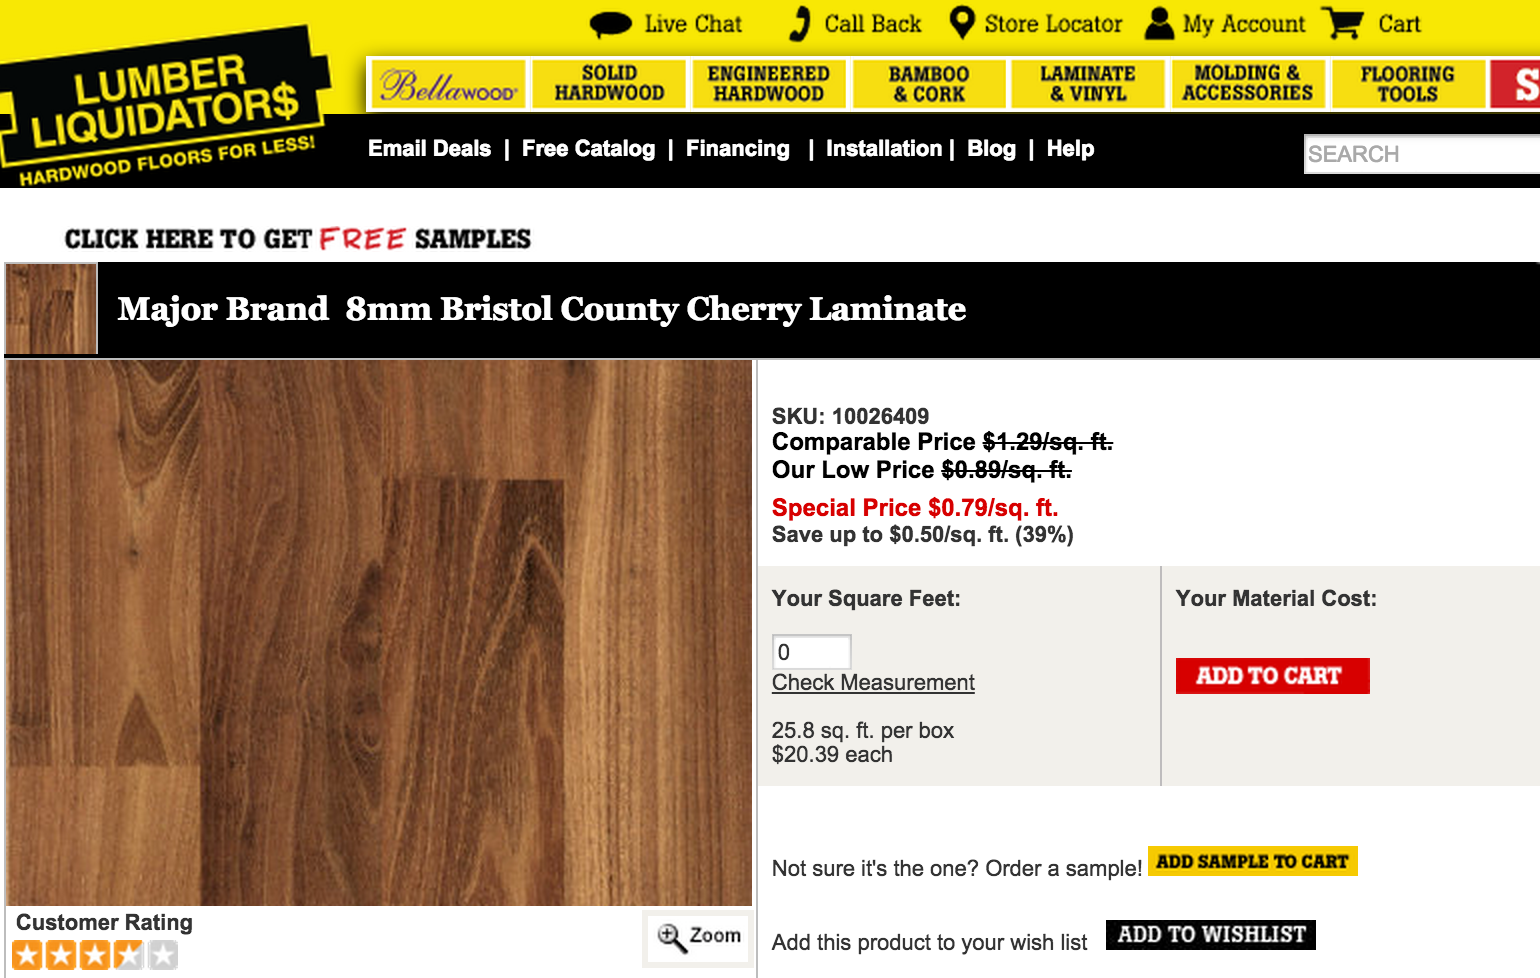 Lumber Liquidators To Pay California $2.5M For Having Too Much Formaldehyde In Its Flooring